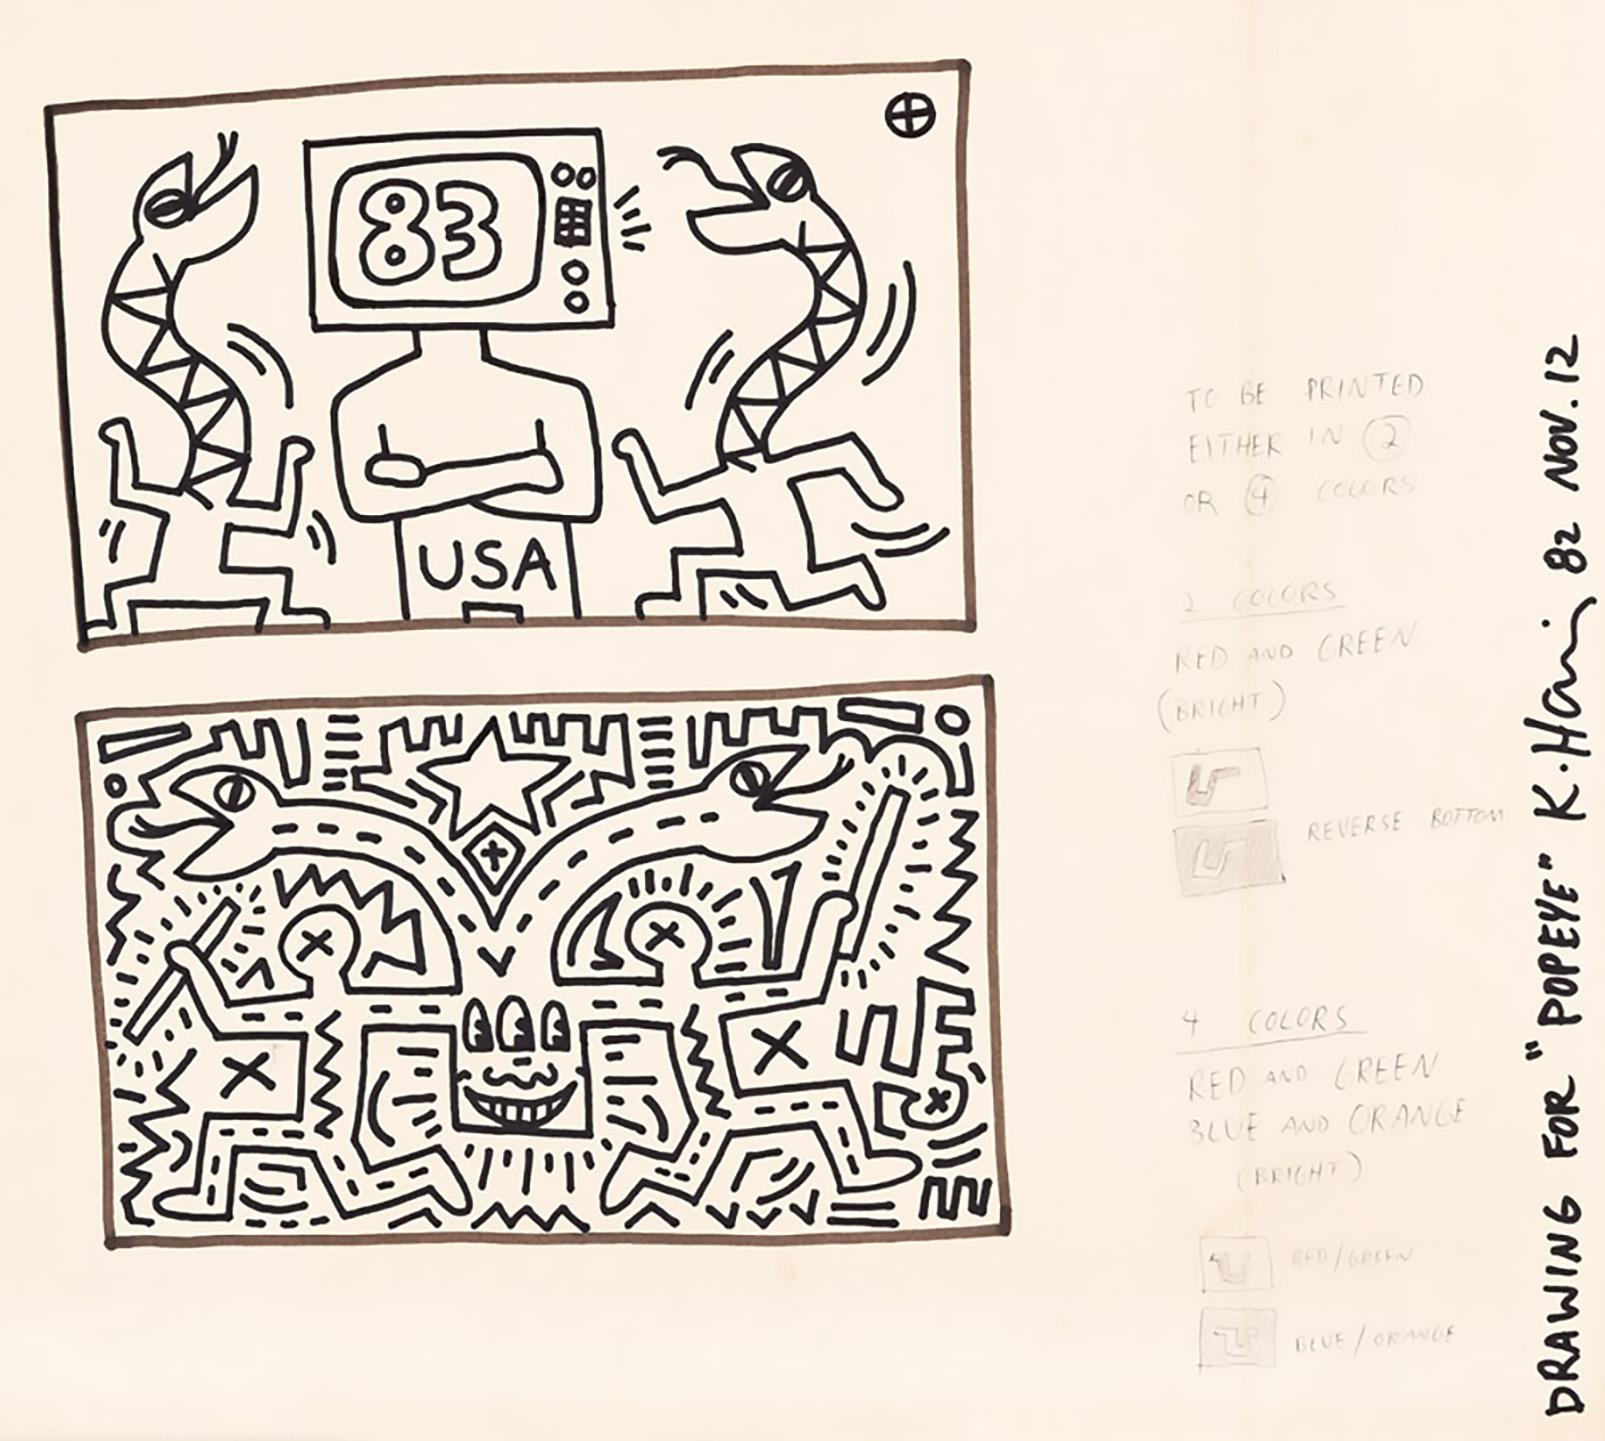 Keith Haring drawing Japan 1982:
Keith Haring executed this rare double drawing during his key breakout year of 1982 in collaboration with the historic Japanese pop cultural publication: Popeye. 

The work emanates from the personal collection of a